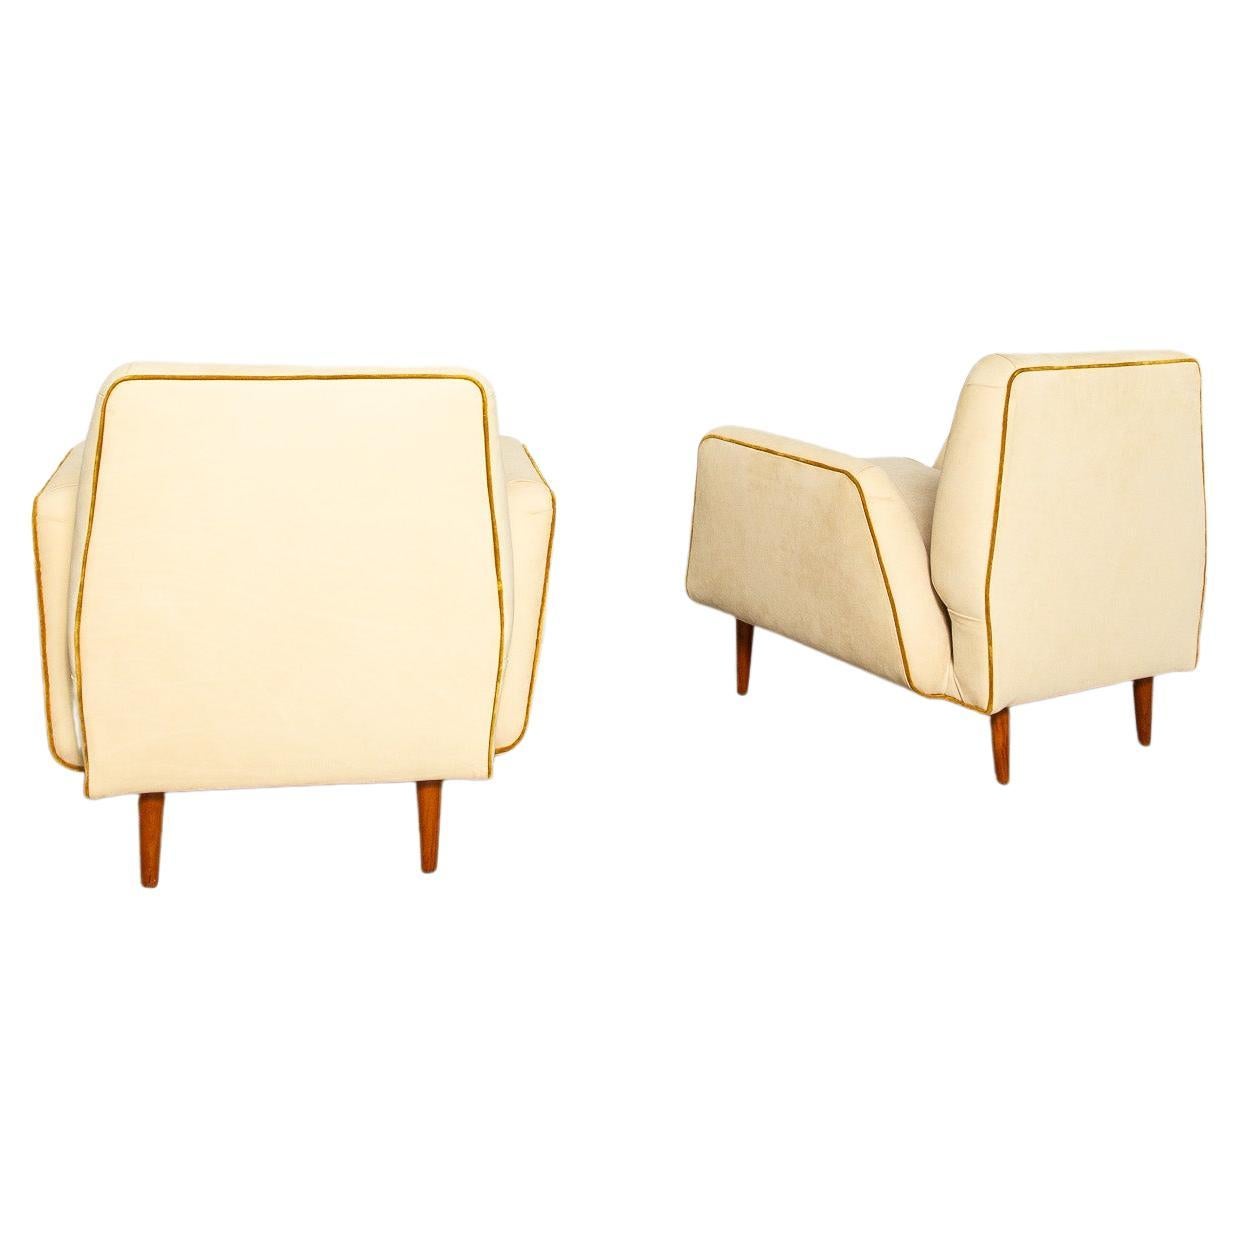 Mid-Century Modern Rare Forma armchairs by Carlo Hauner and Martin Eisler, 1955 For Sale